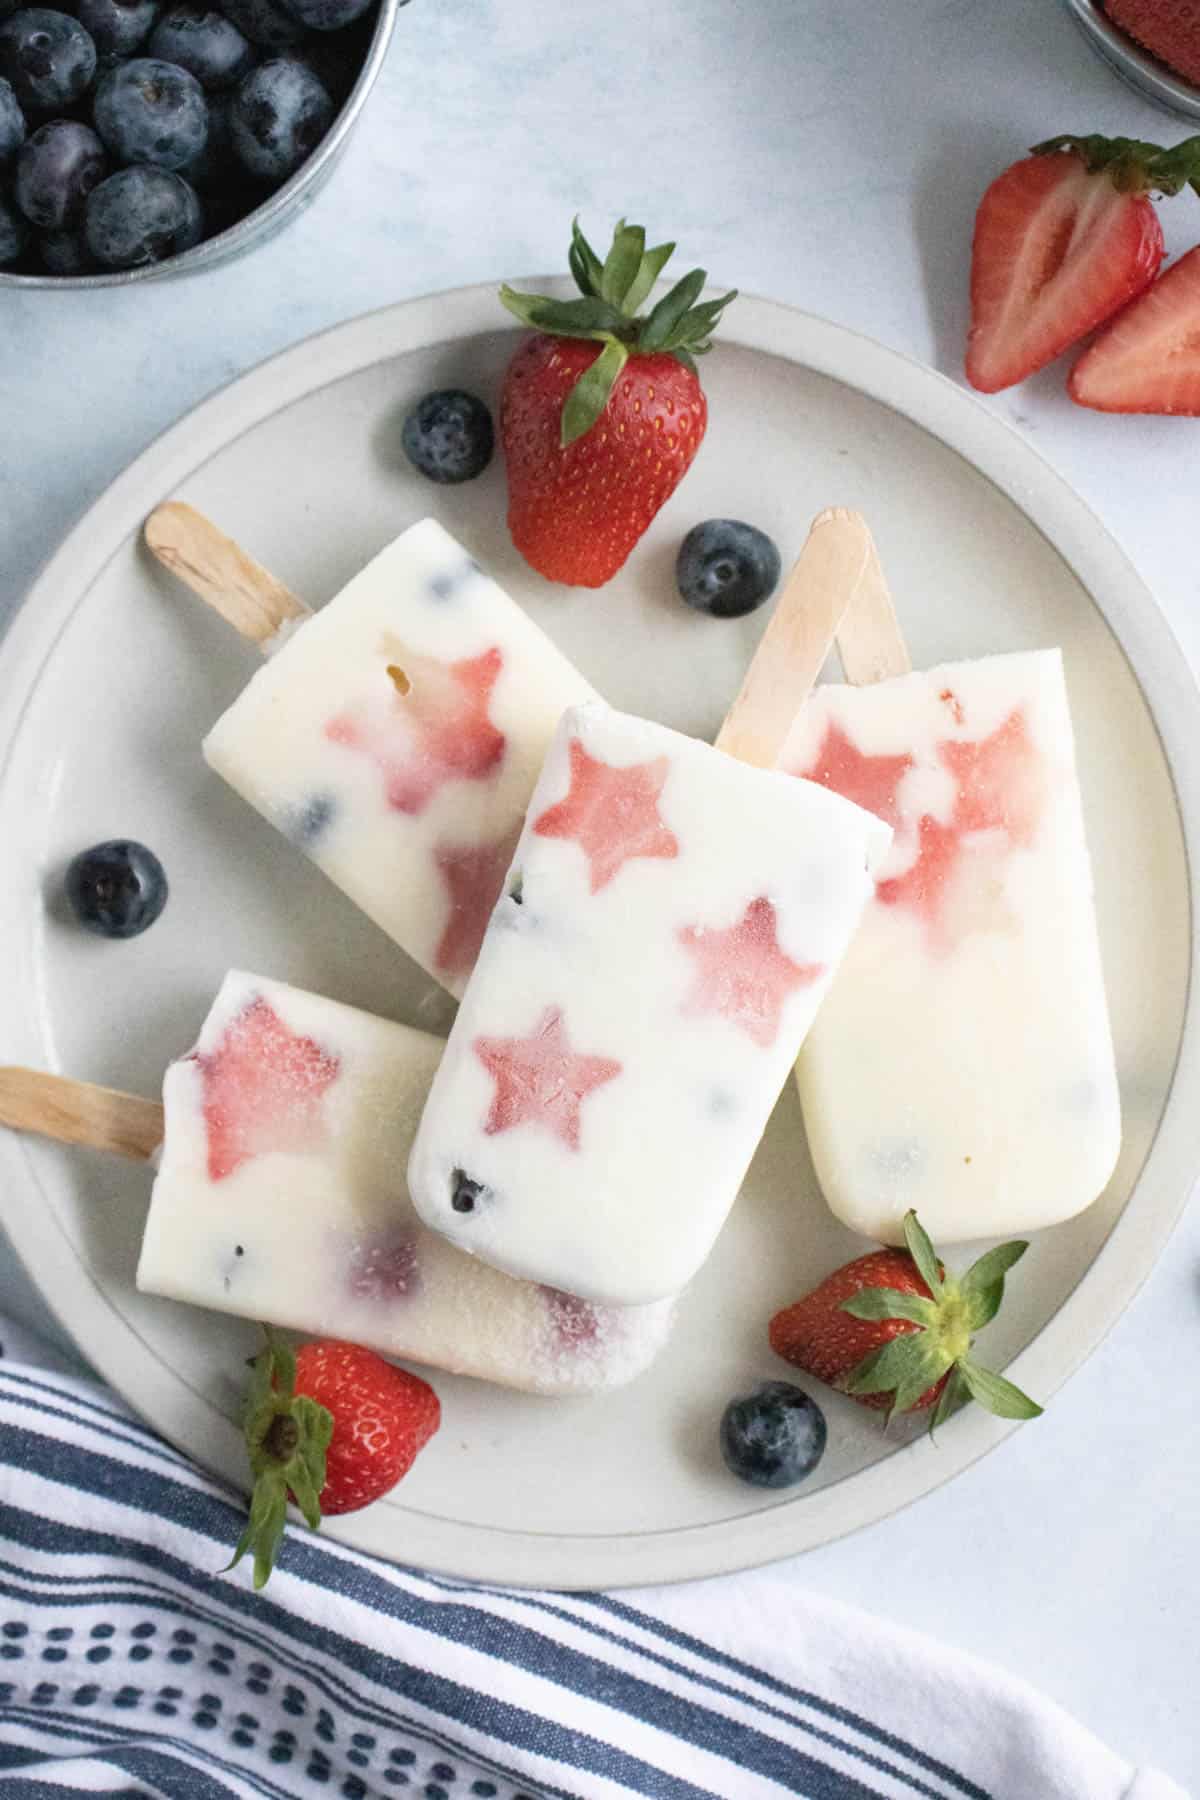 A plate of patriotic popsicles next to strawberries and blueberries.